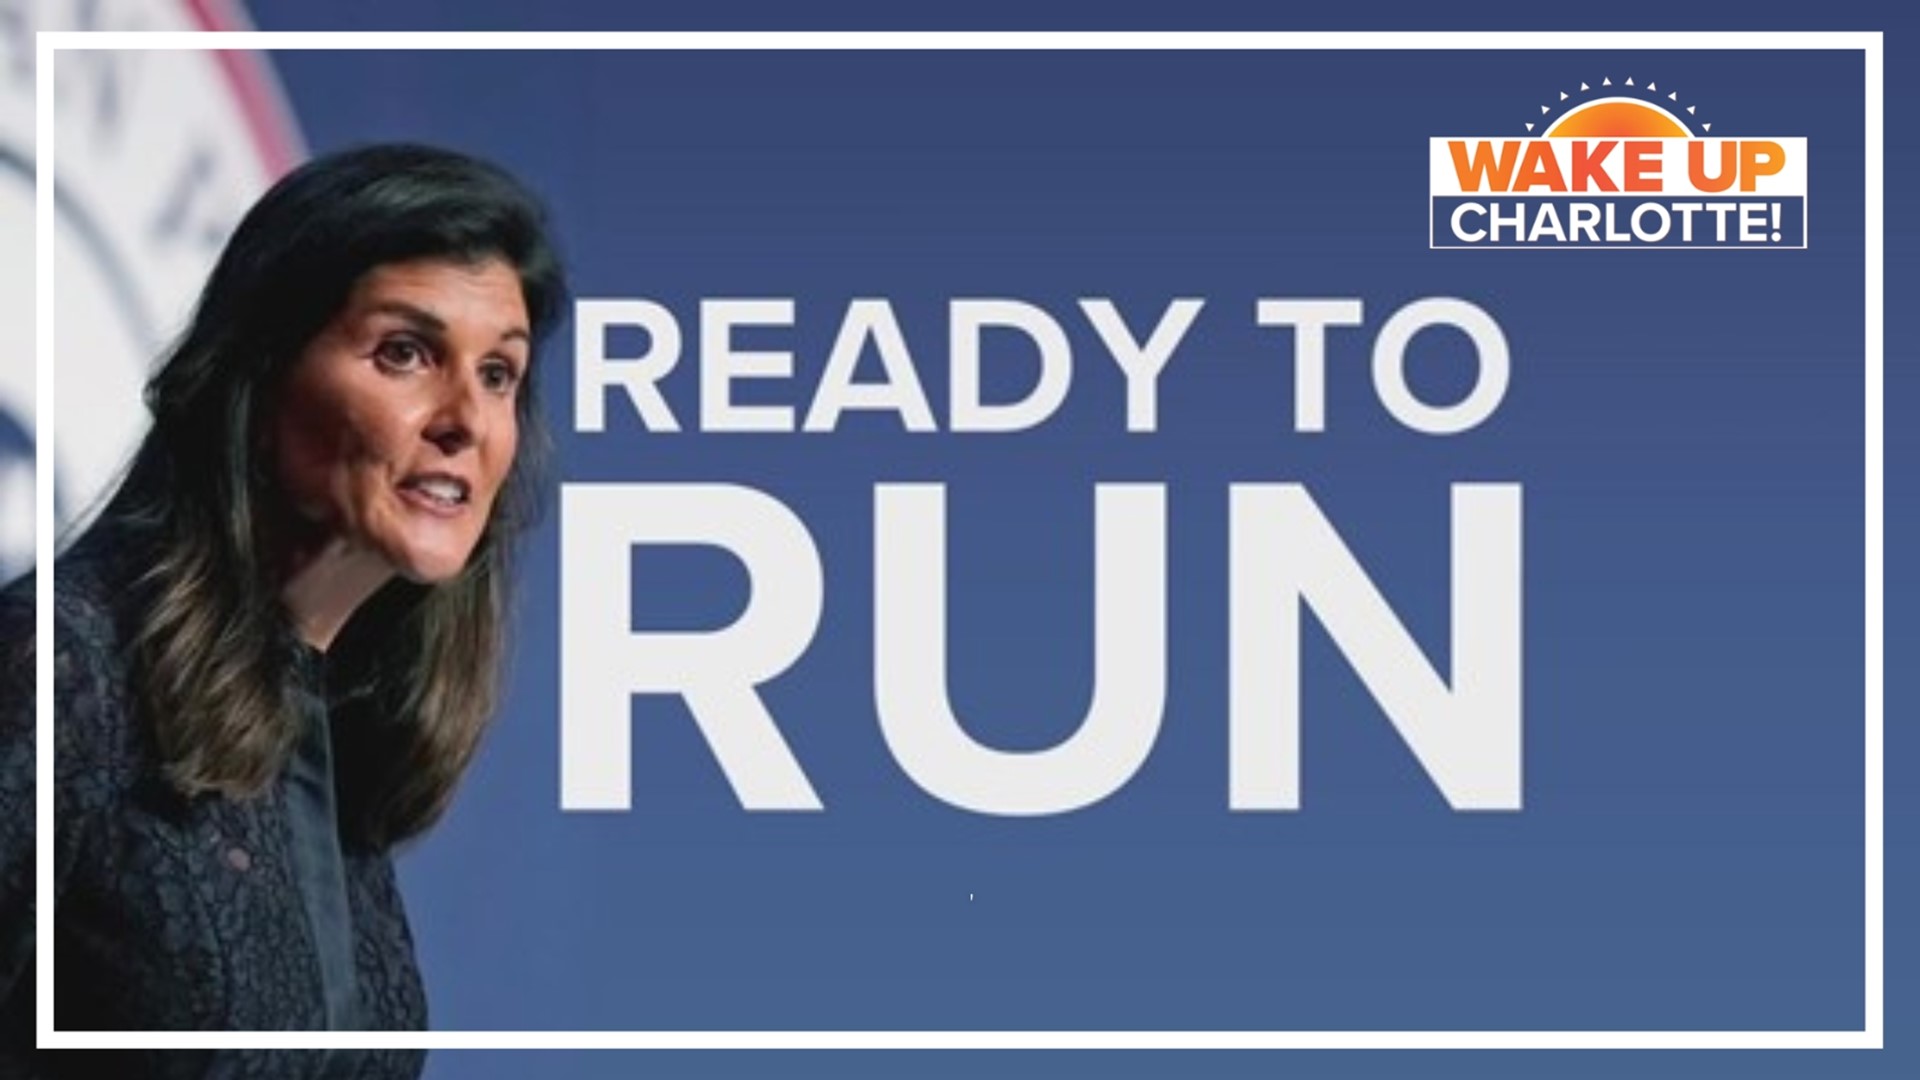 Haley served as South Carolina's governor for six years before serving as President Donald Trump's ambassador to the United Nations.